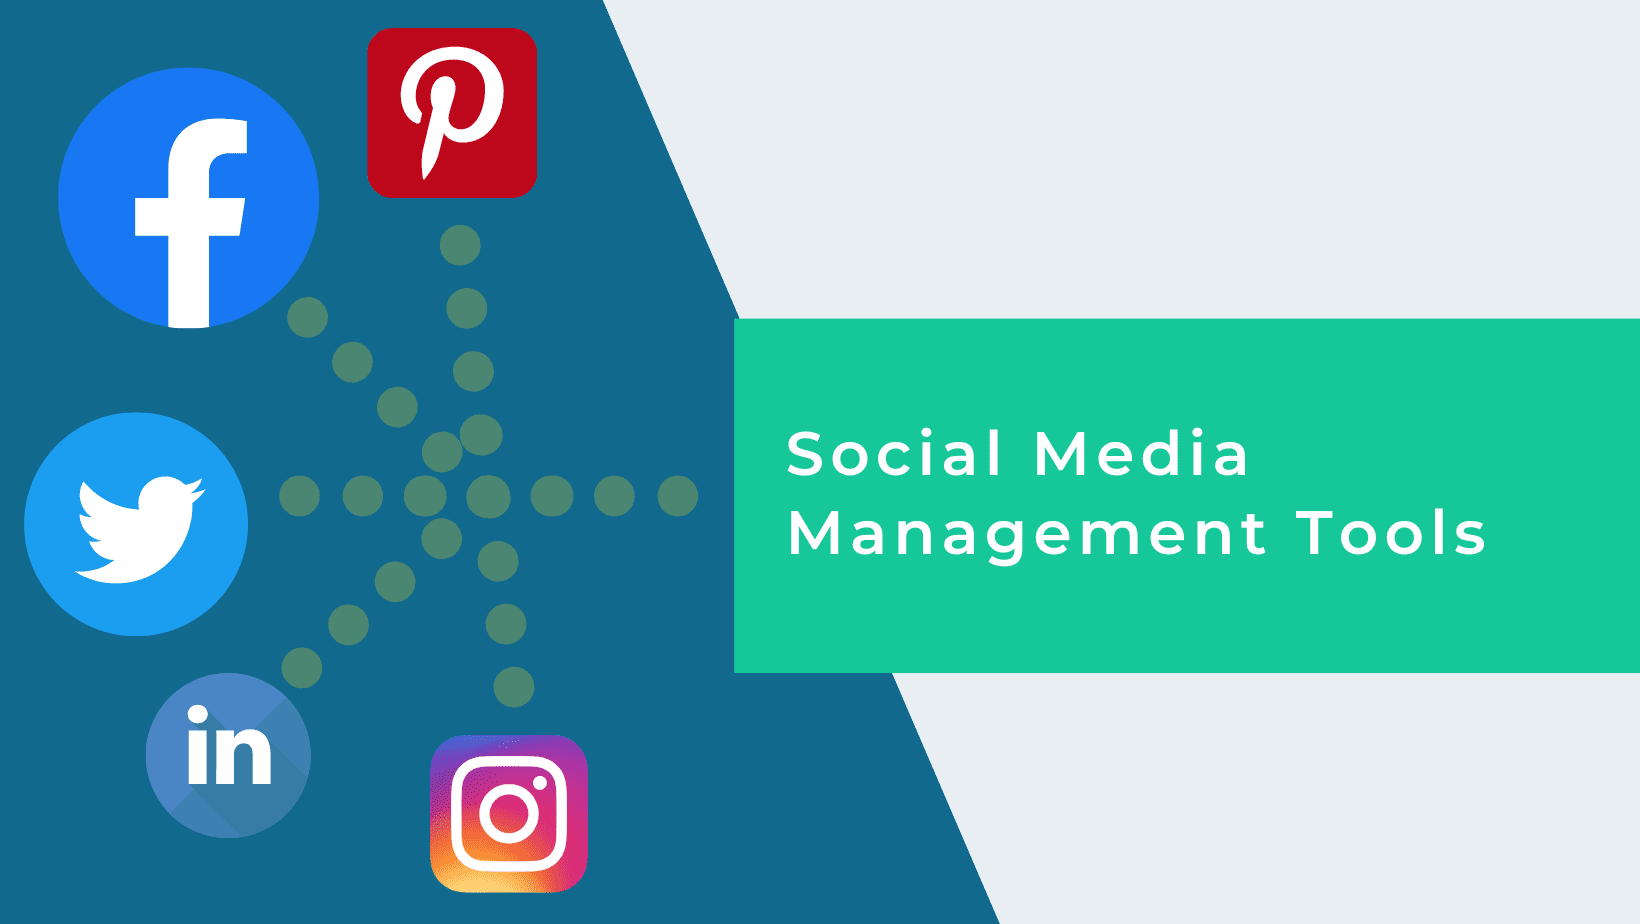 Featured image for the best social media management tools with social media logos